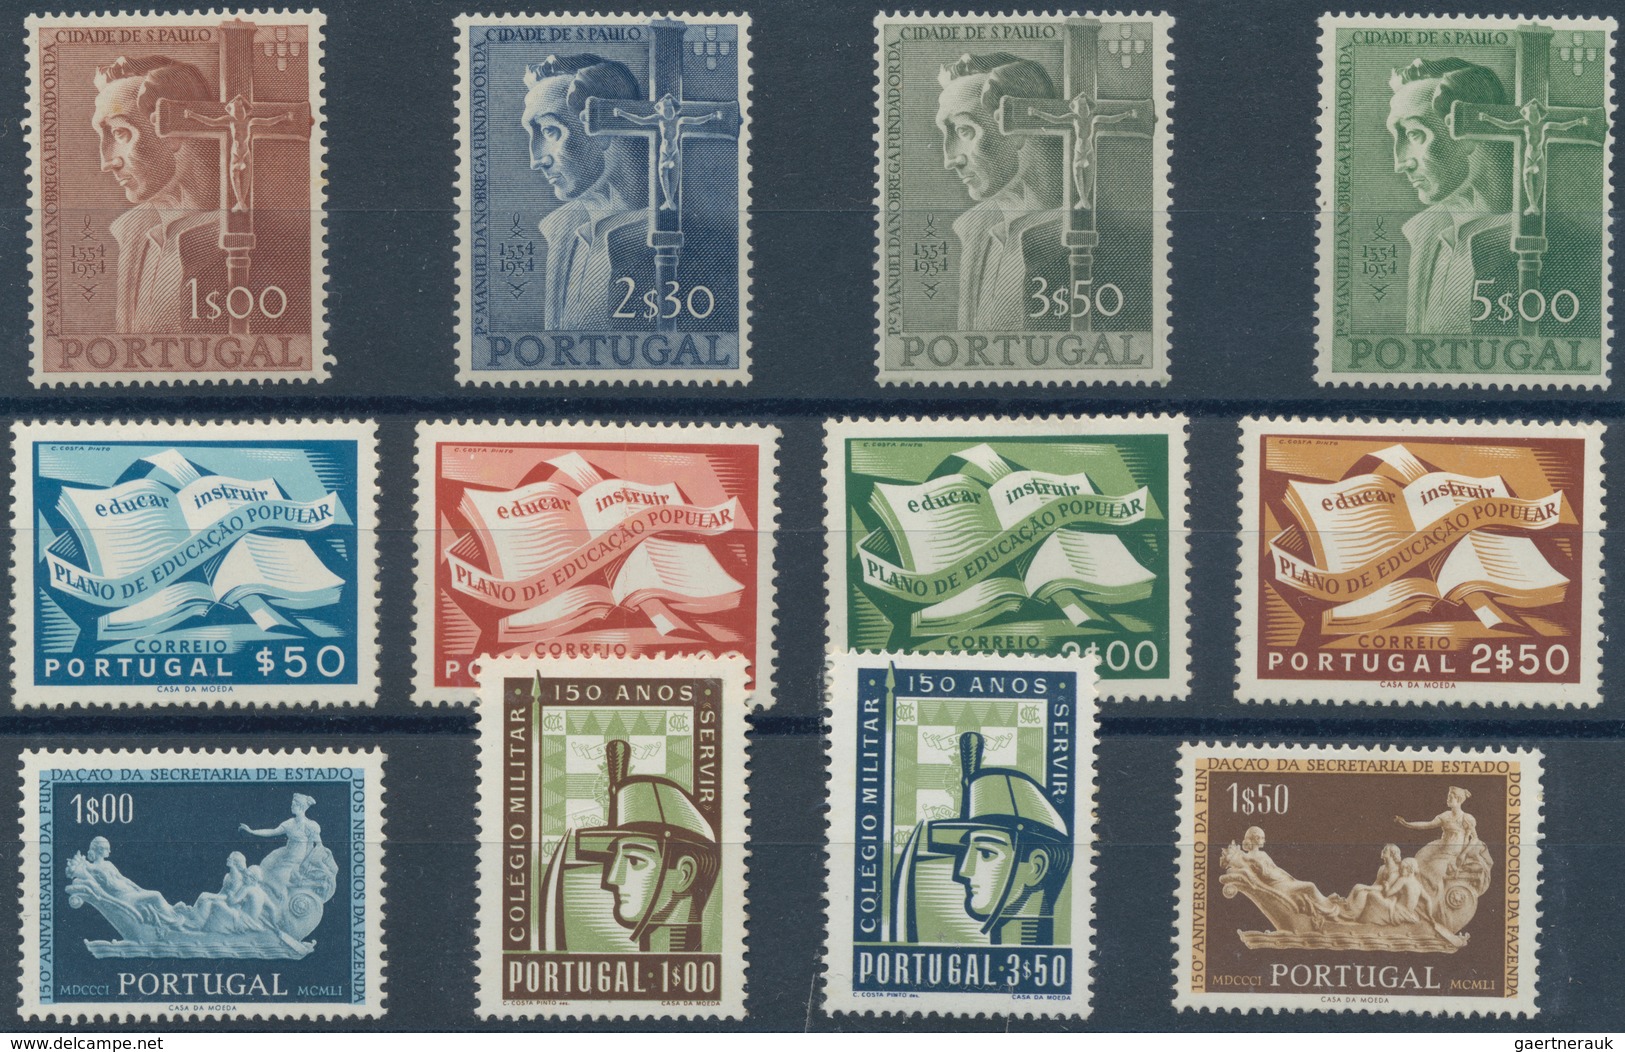 Portugal: 1940/1954, ten complete year sets without the souvenir sheets, mint never hinged, some sta